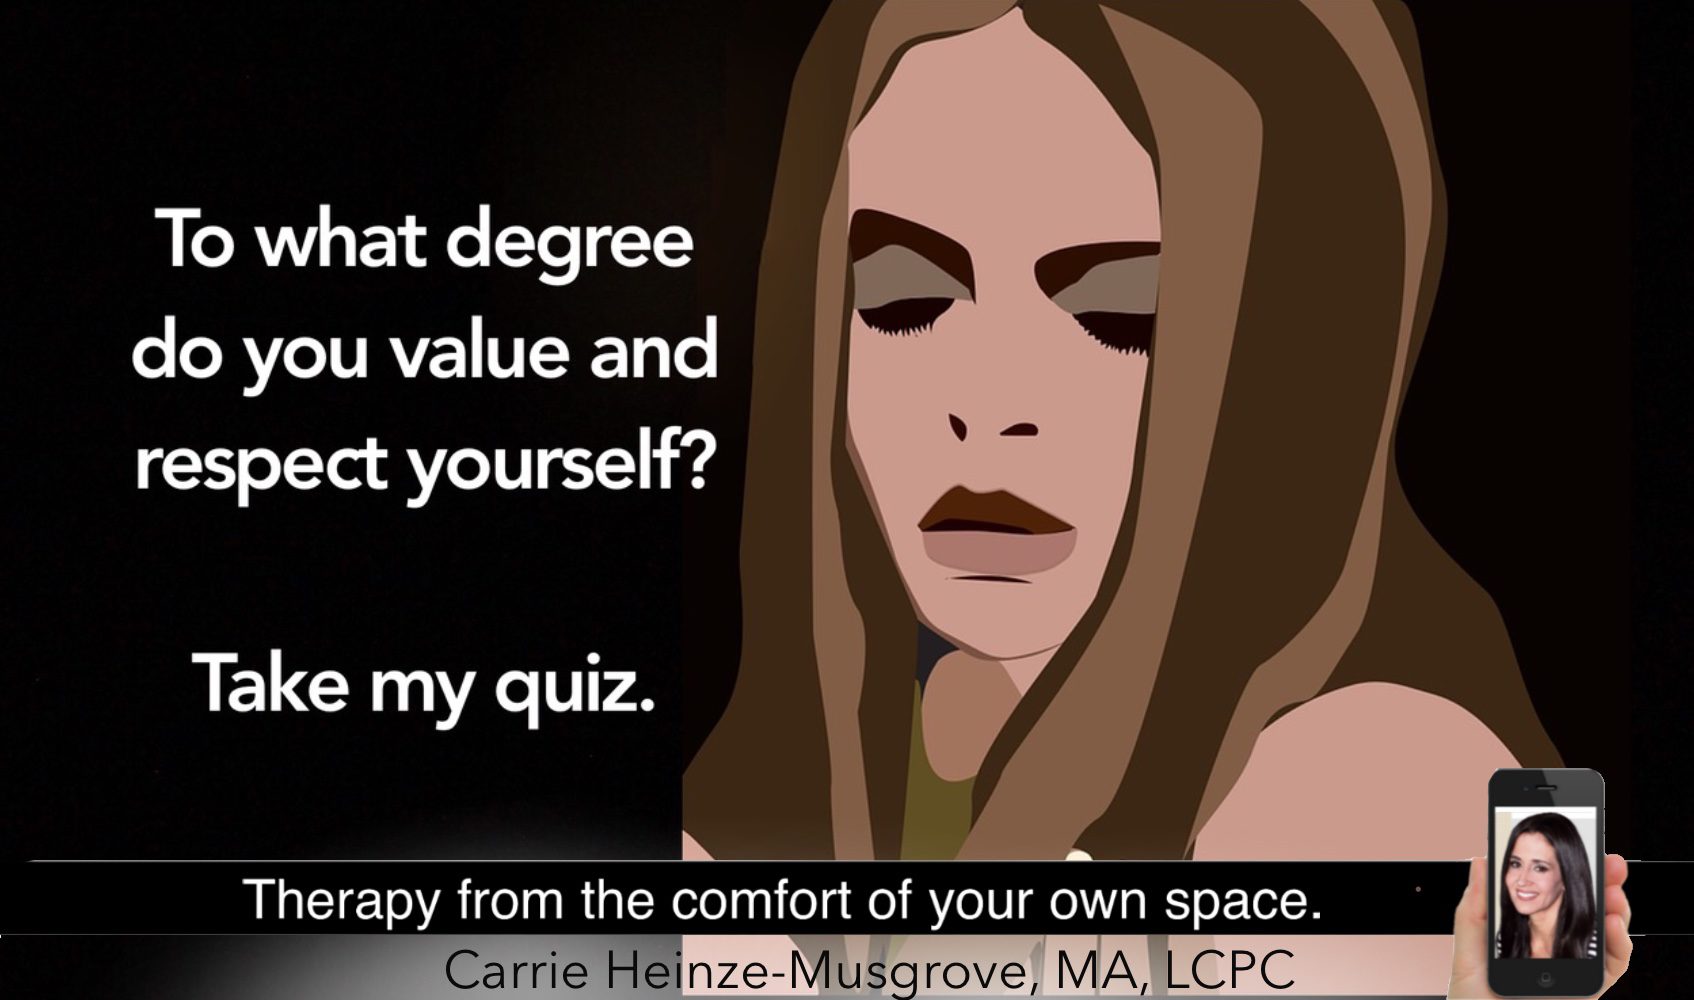 How do you value yourself?